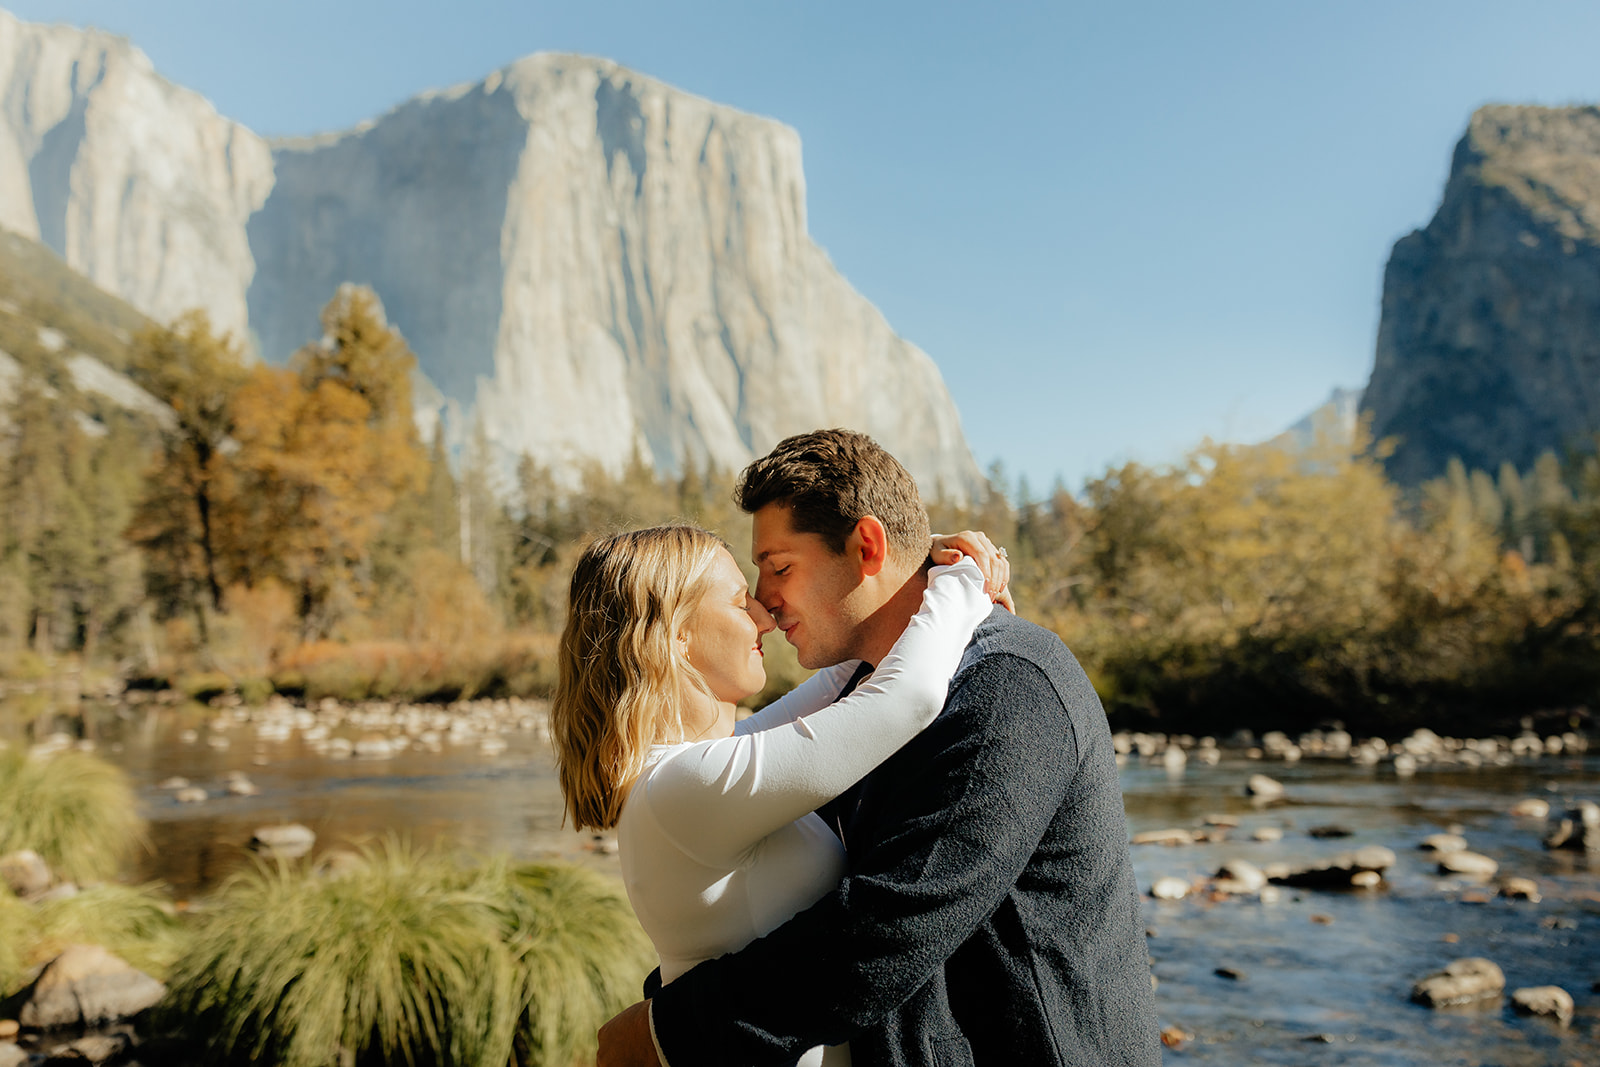 Playful Mountain Engagement Photos On The Yosemite Valley Floor